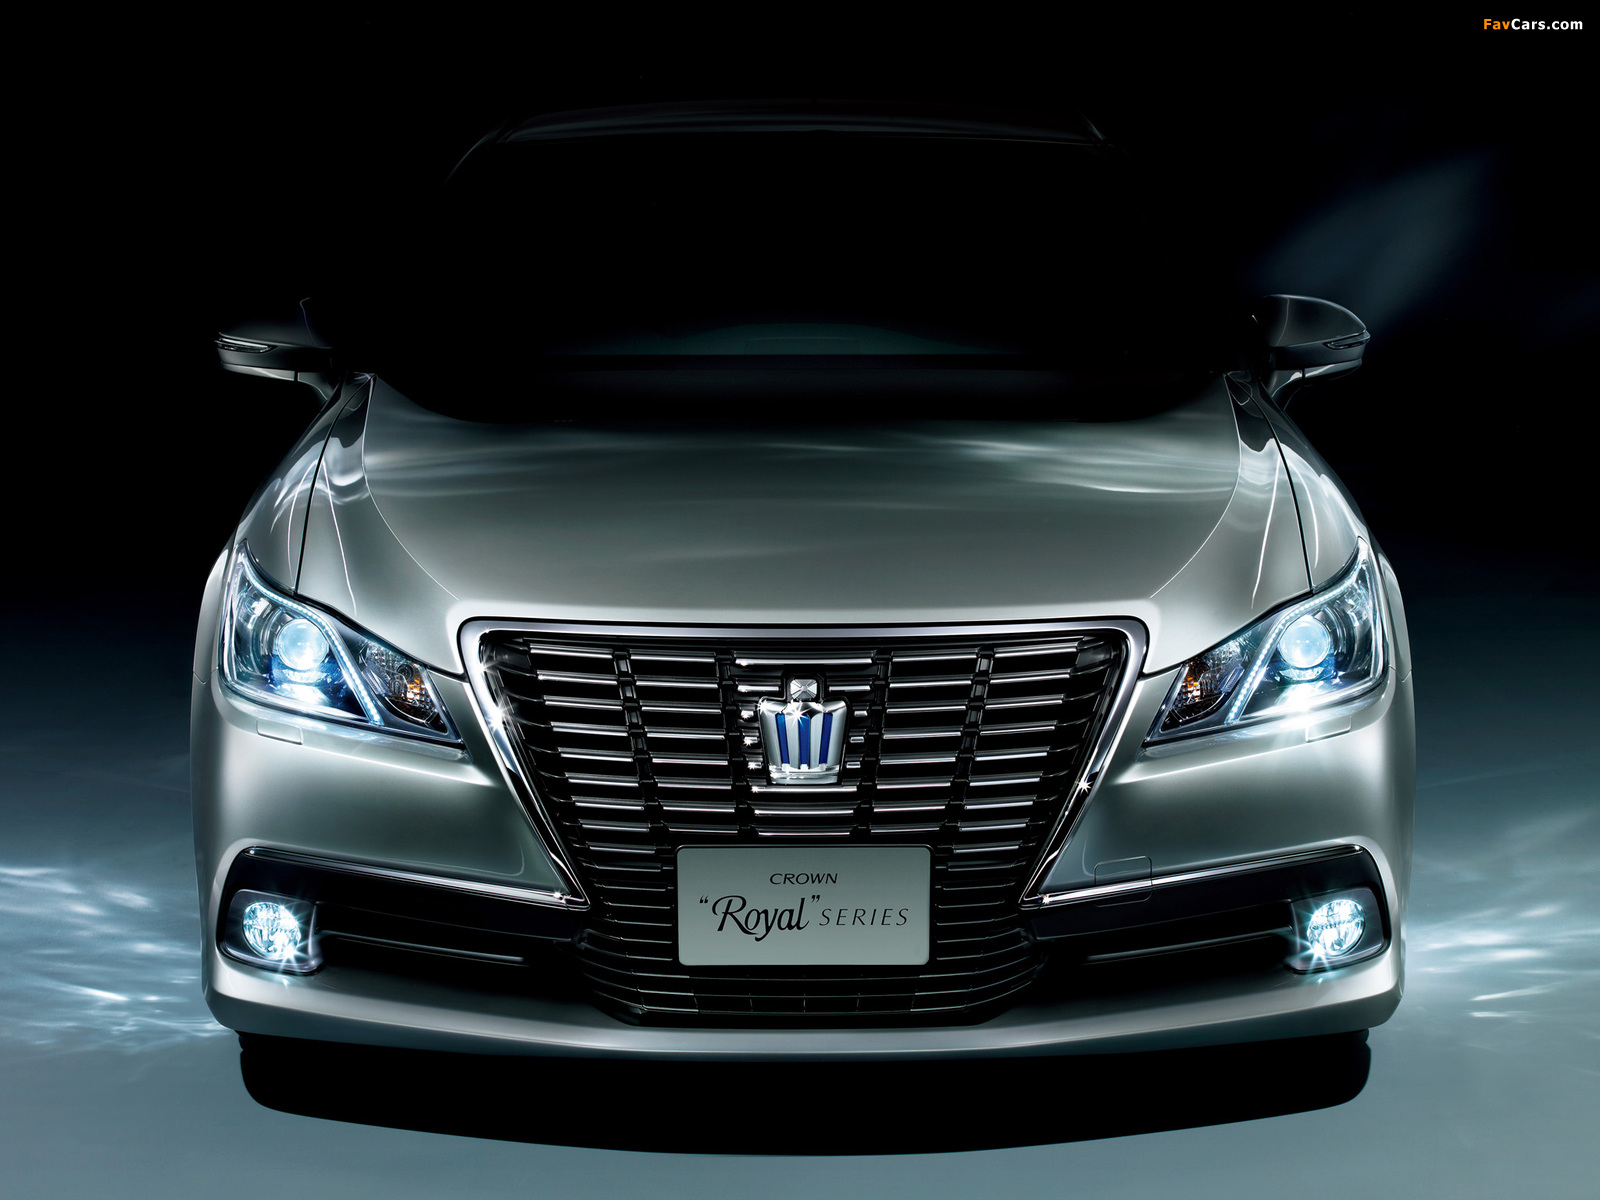 Toyota Crown Hybrid Royal Saloon (S210) 2012 pictures (1600 x 1200)